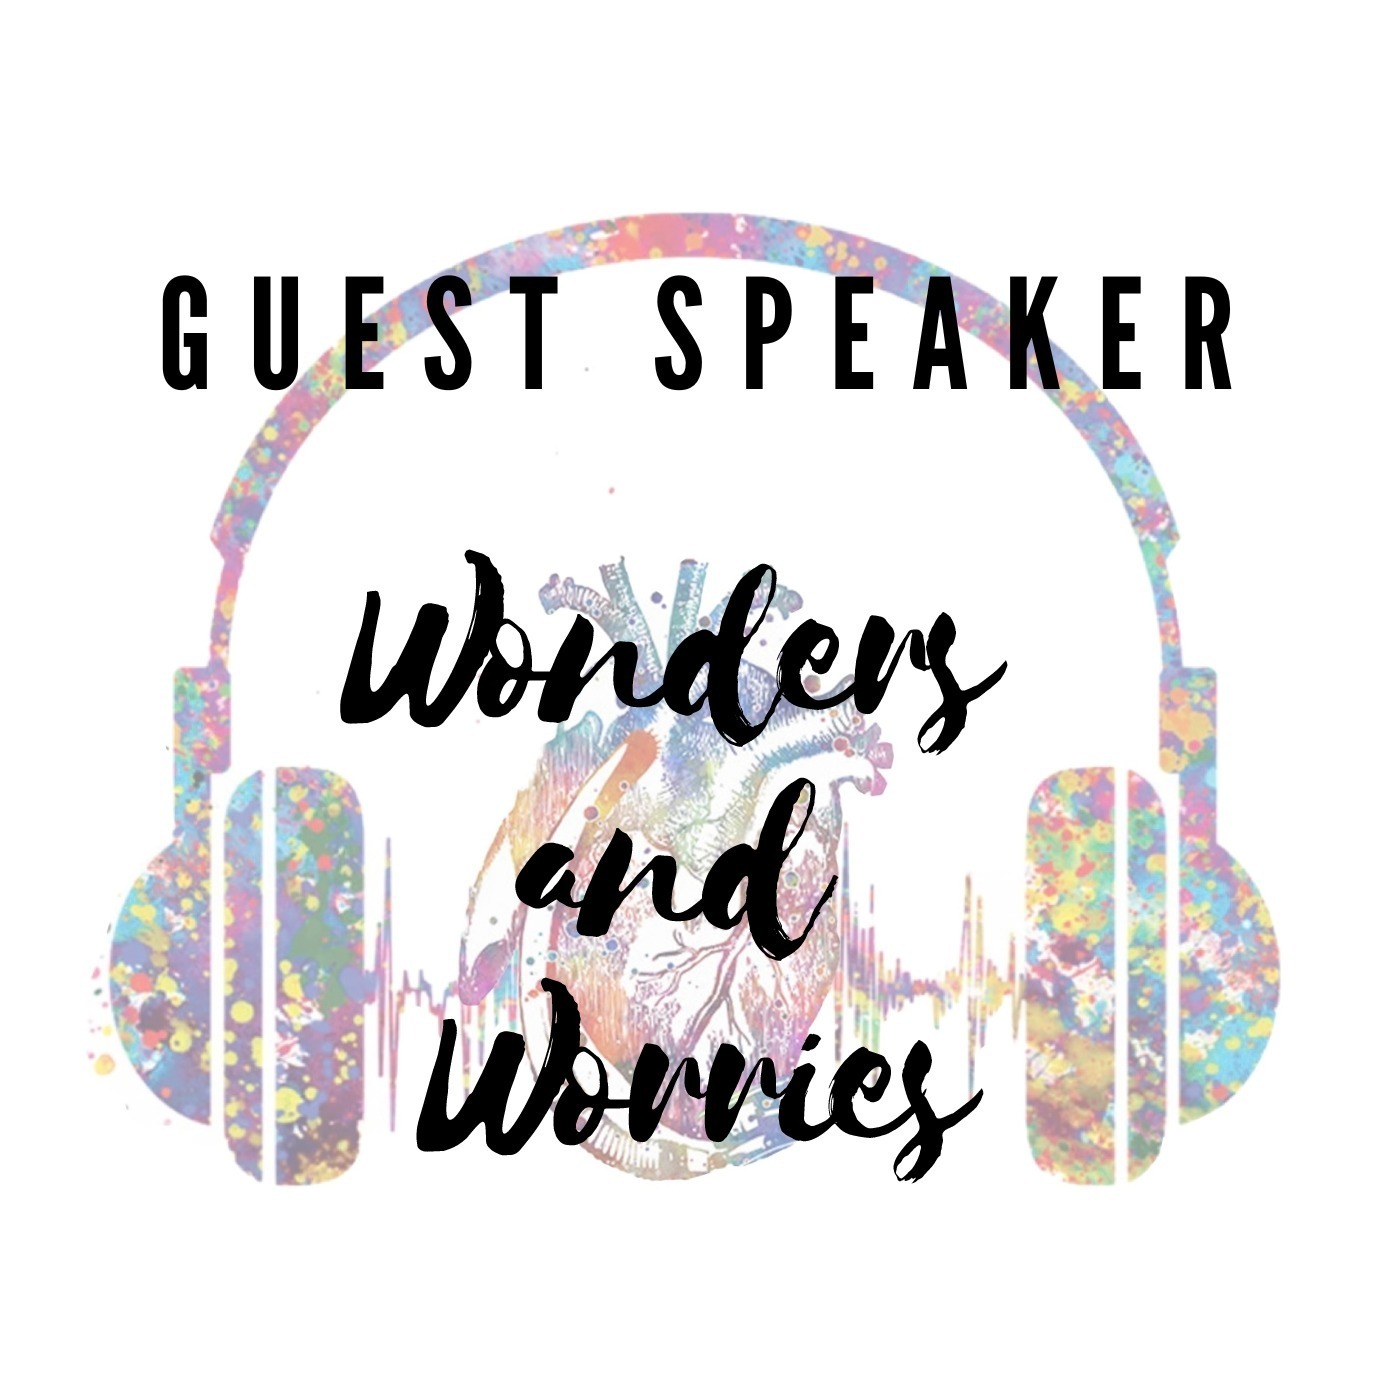 Episode 9.2: Family Systems Guest Speaker: Wonders and Worries